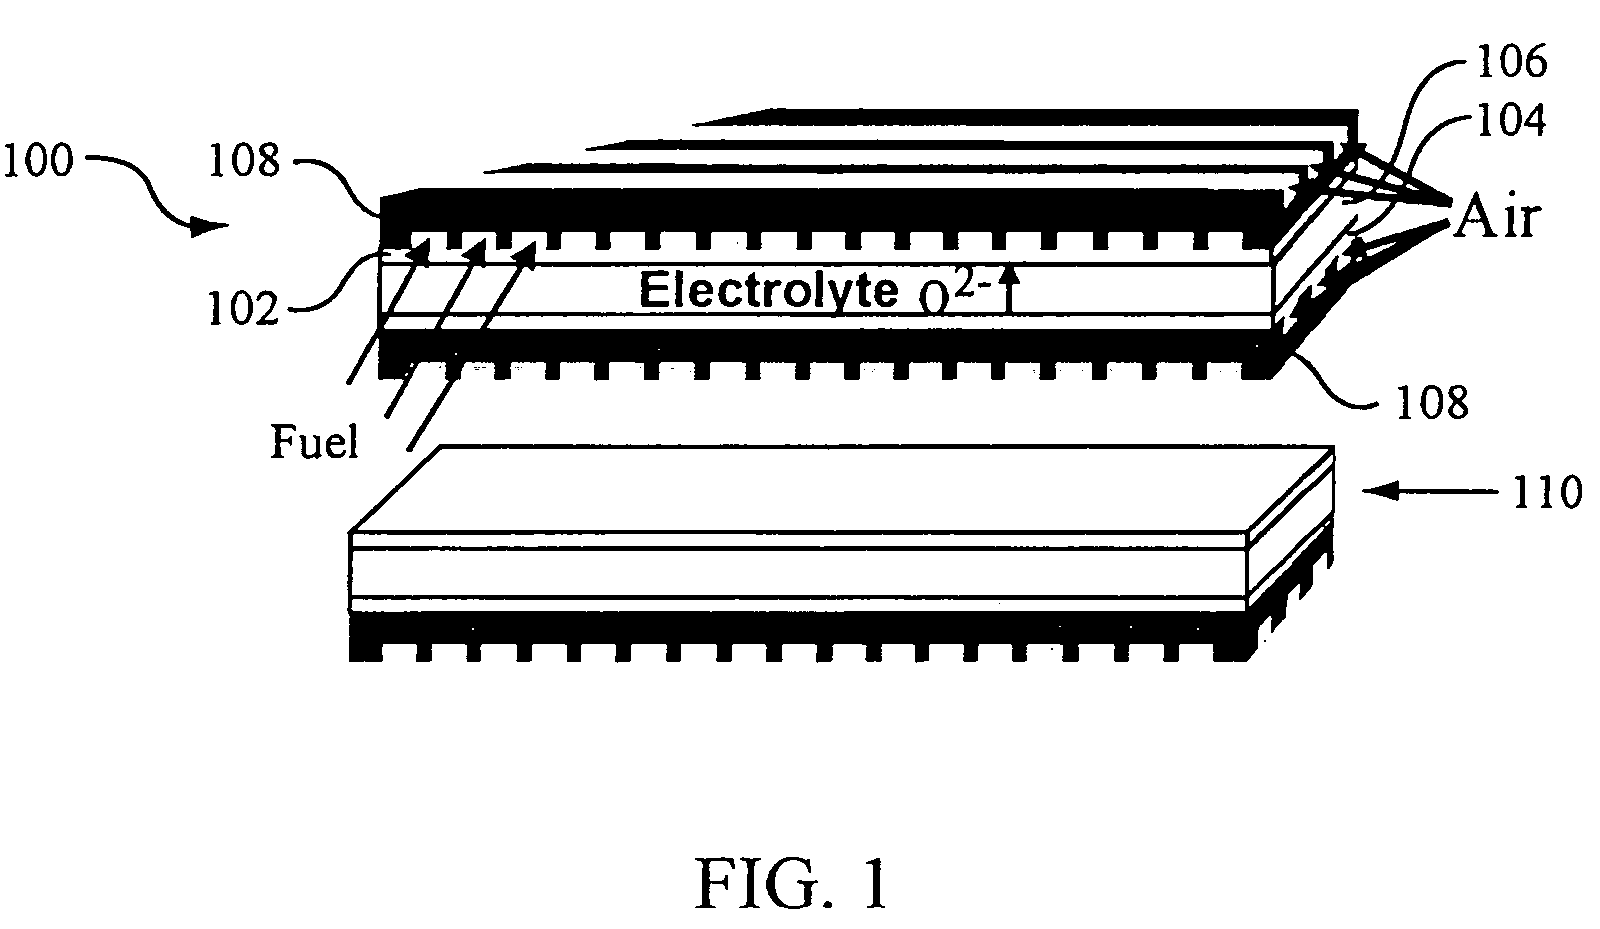 Structures and fabrication techniques for solid state electrochemical devices